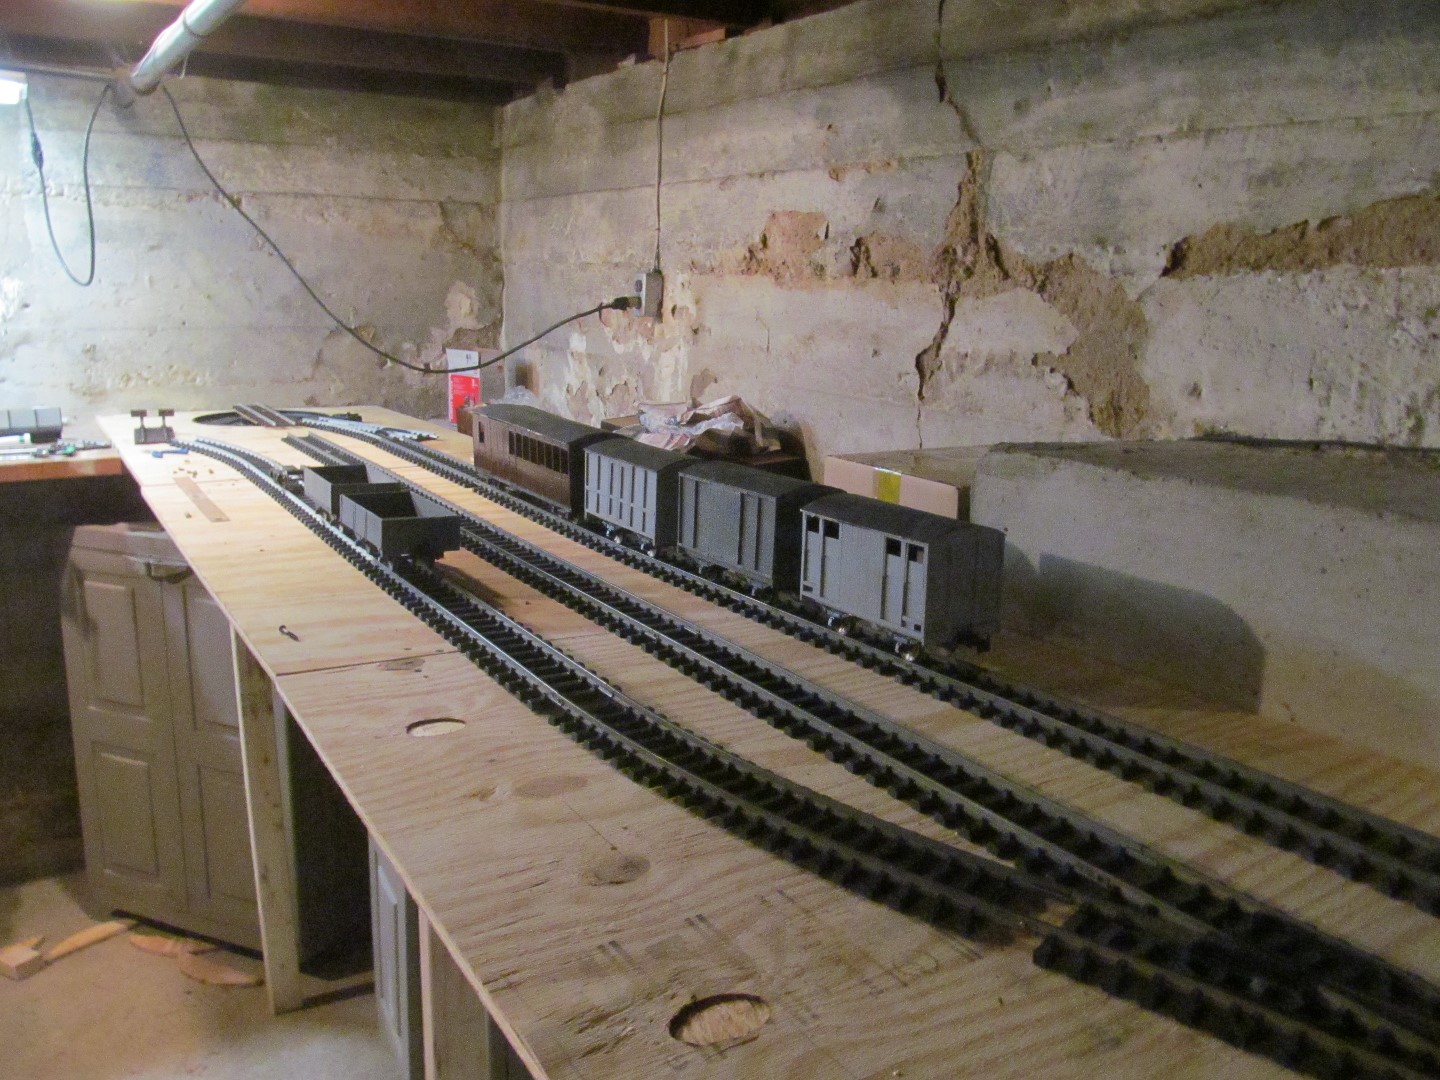 General view towards work bench, and turntable end of main station